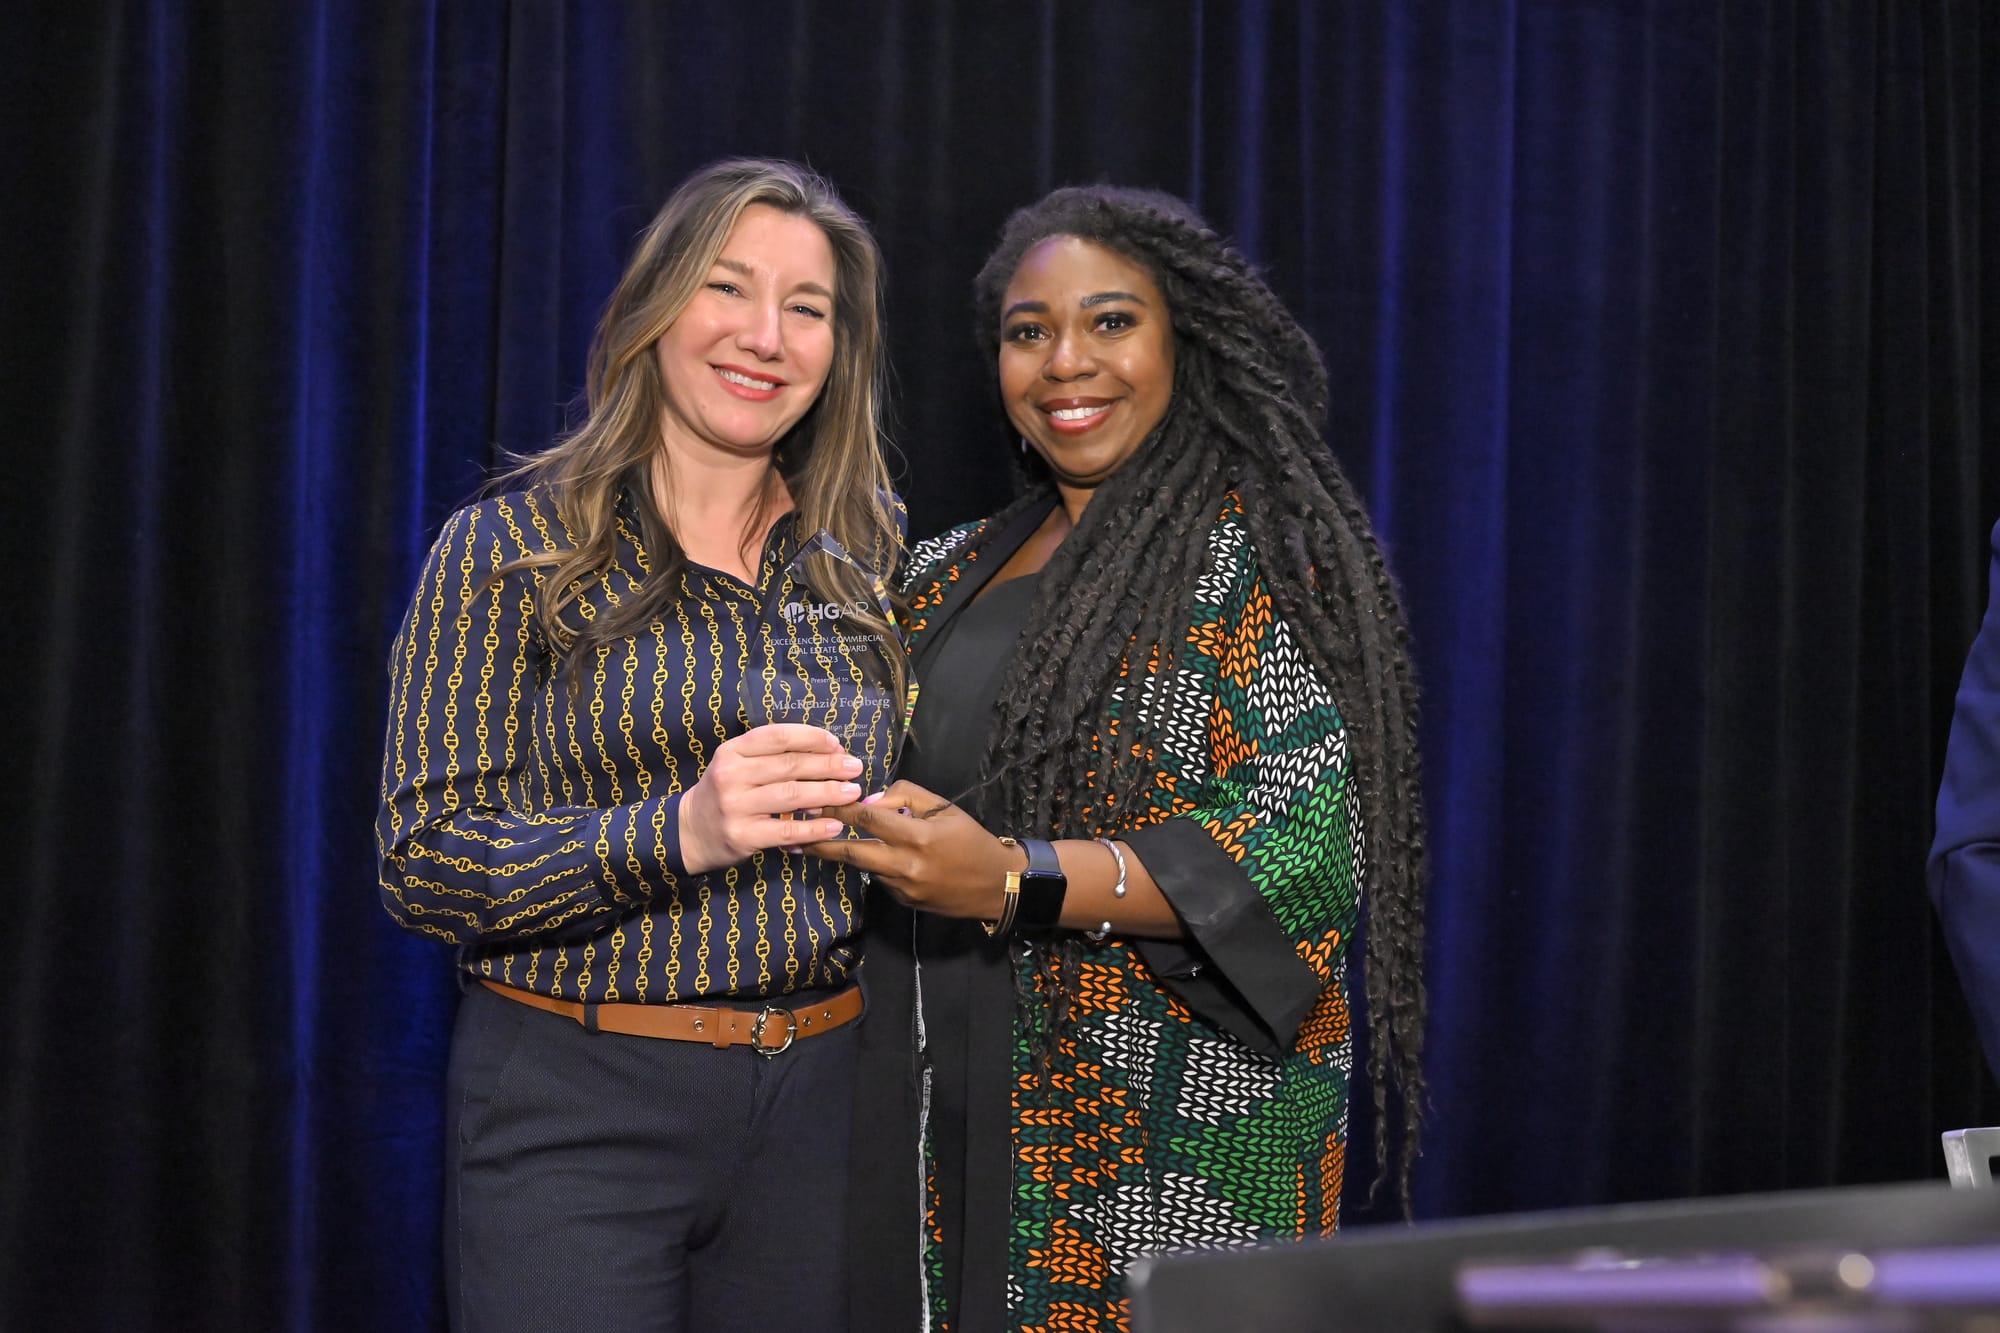 MacKenzie Forsberg, left, winner of HGAR’s “Excellence in Commercial Real Estate Award,” and Crystal Hawkins-Syska, HGAR Recognition Committee Chair.